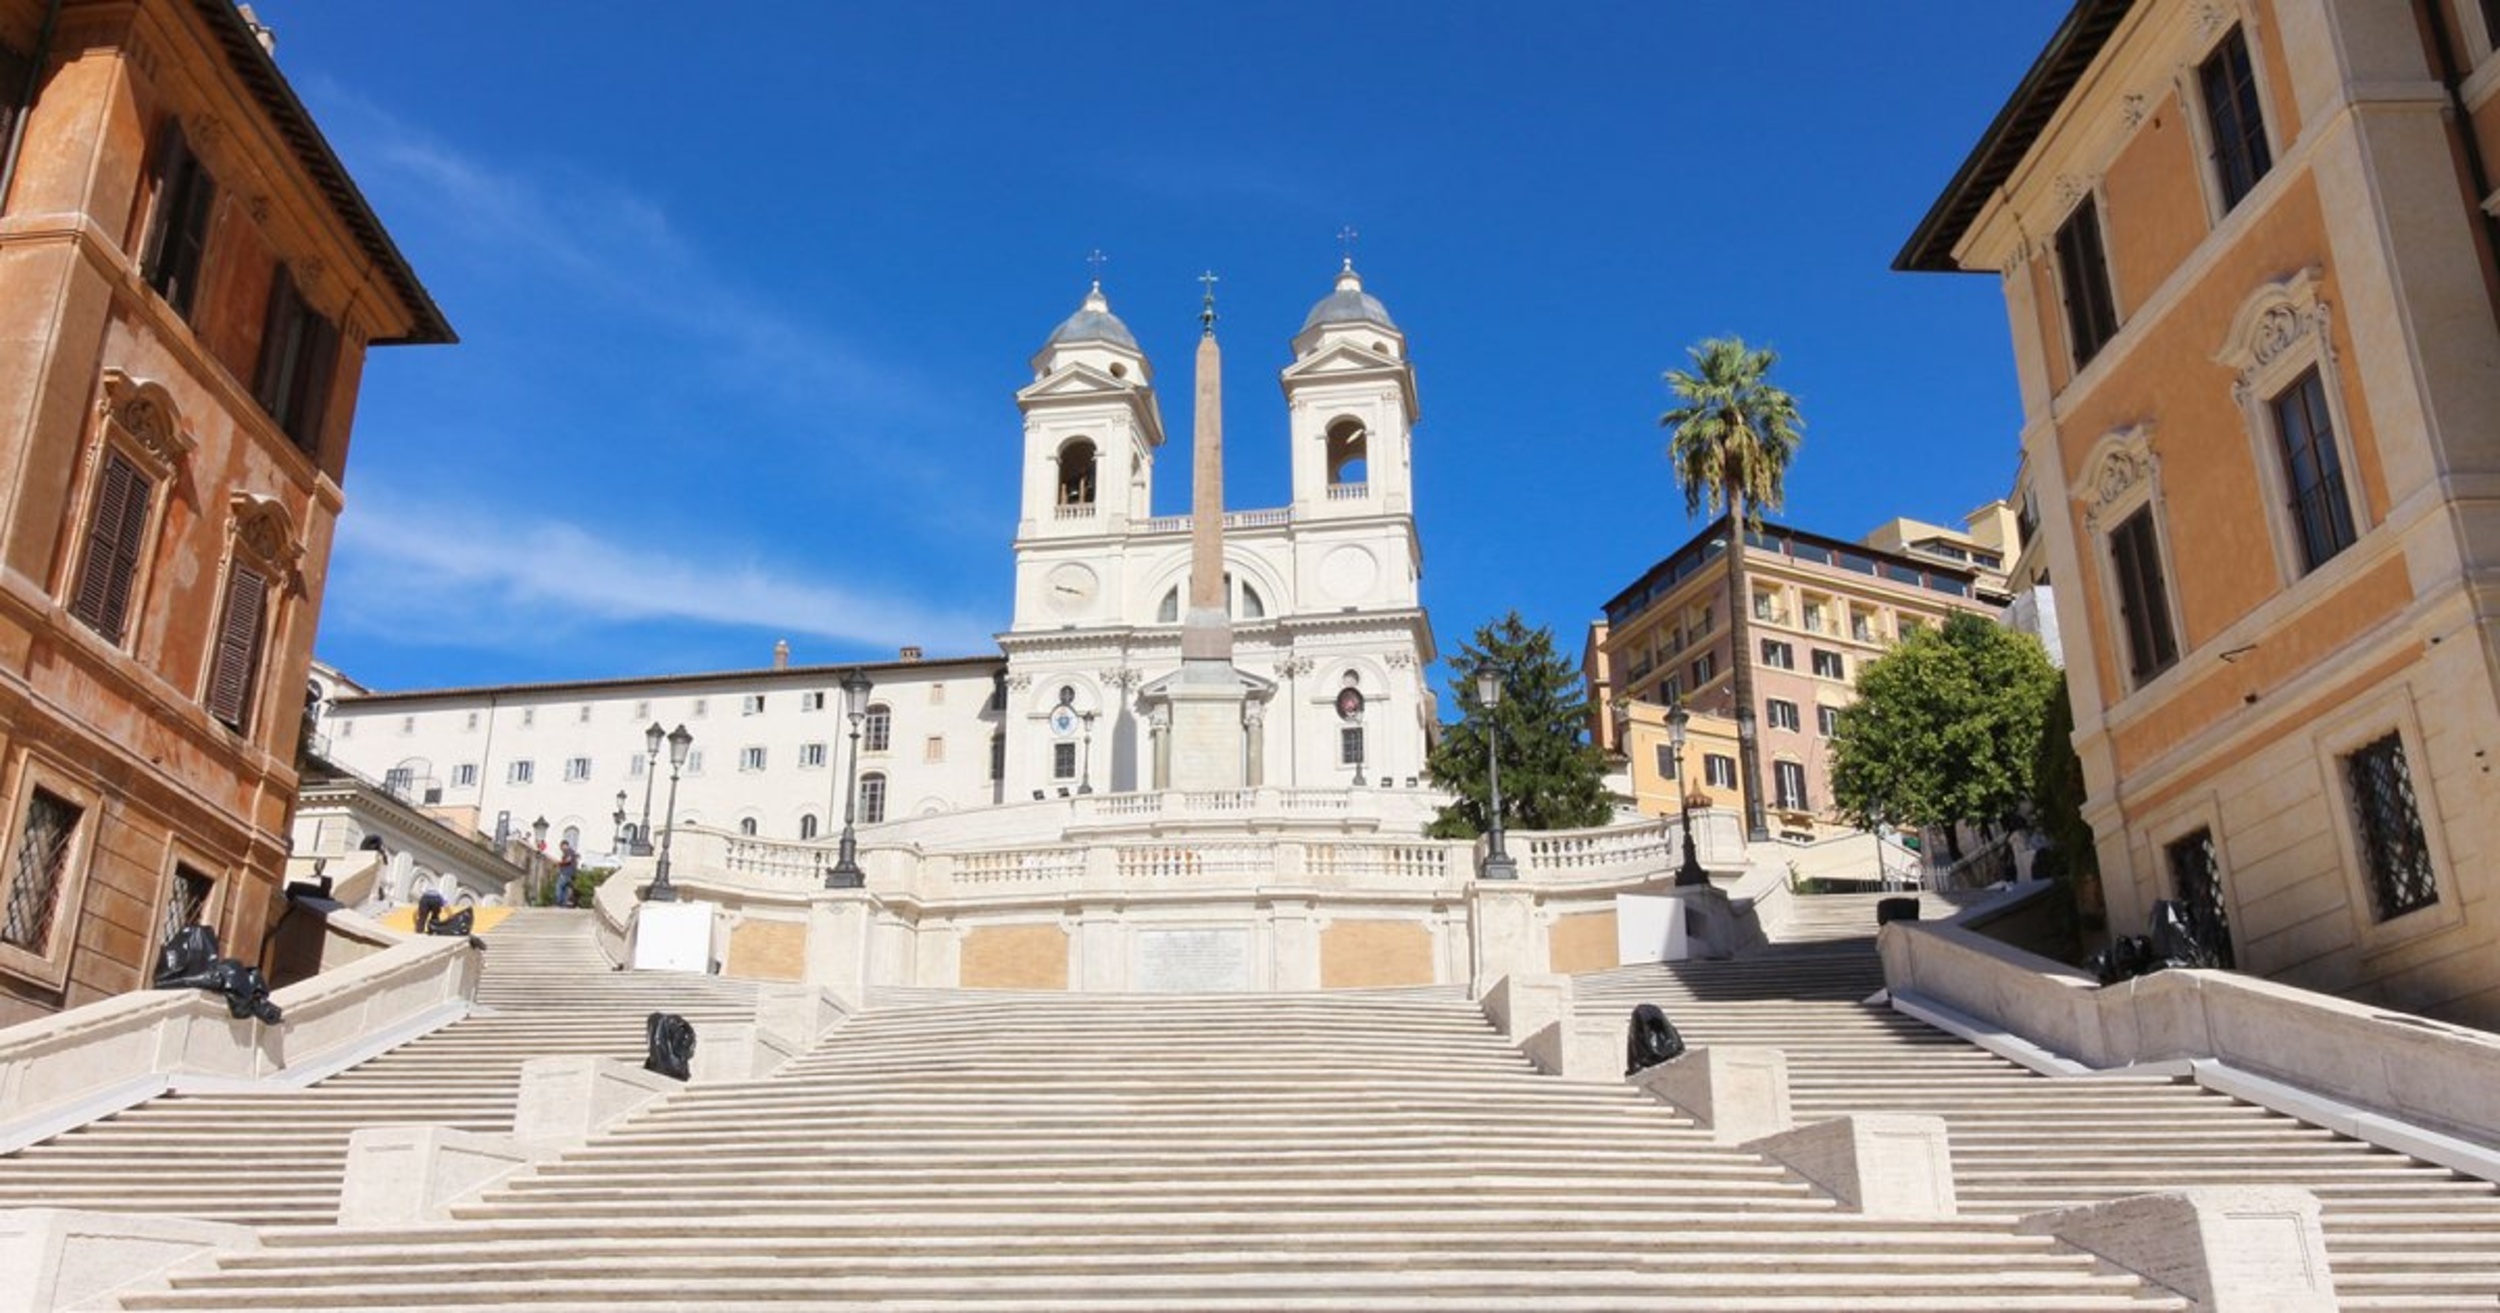 <p>Walking is the perfect way to burn off pasta, so the Spanish Steps make for a perfect afternoon activity. The staircase connecting Piazza di Spagna to the Spanish Embassy is filled with magical sights, from kids splashing in the fountain to emeralds glowing in the embassy. </p><p>You may also like: <a href='https://www.yardbarker.com/lifestyle/articles/21_low_carb_slow_cooker_recipes_110823/s1__39121634'>21 low-carb slow cooker recipes</a></p>